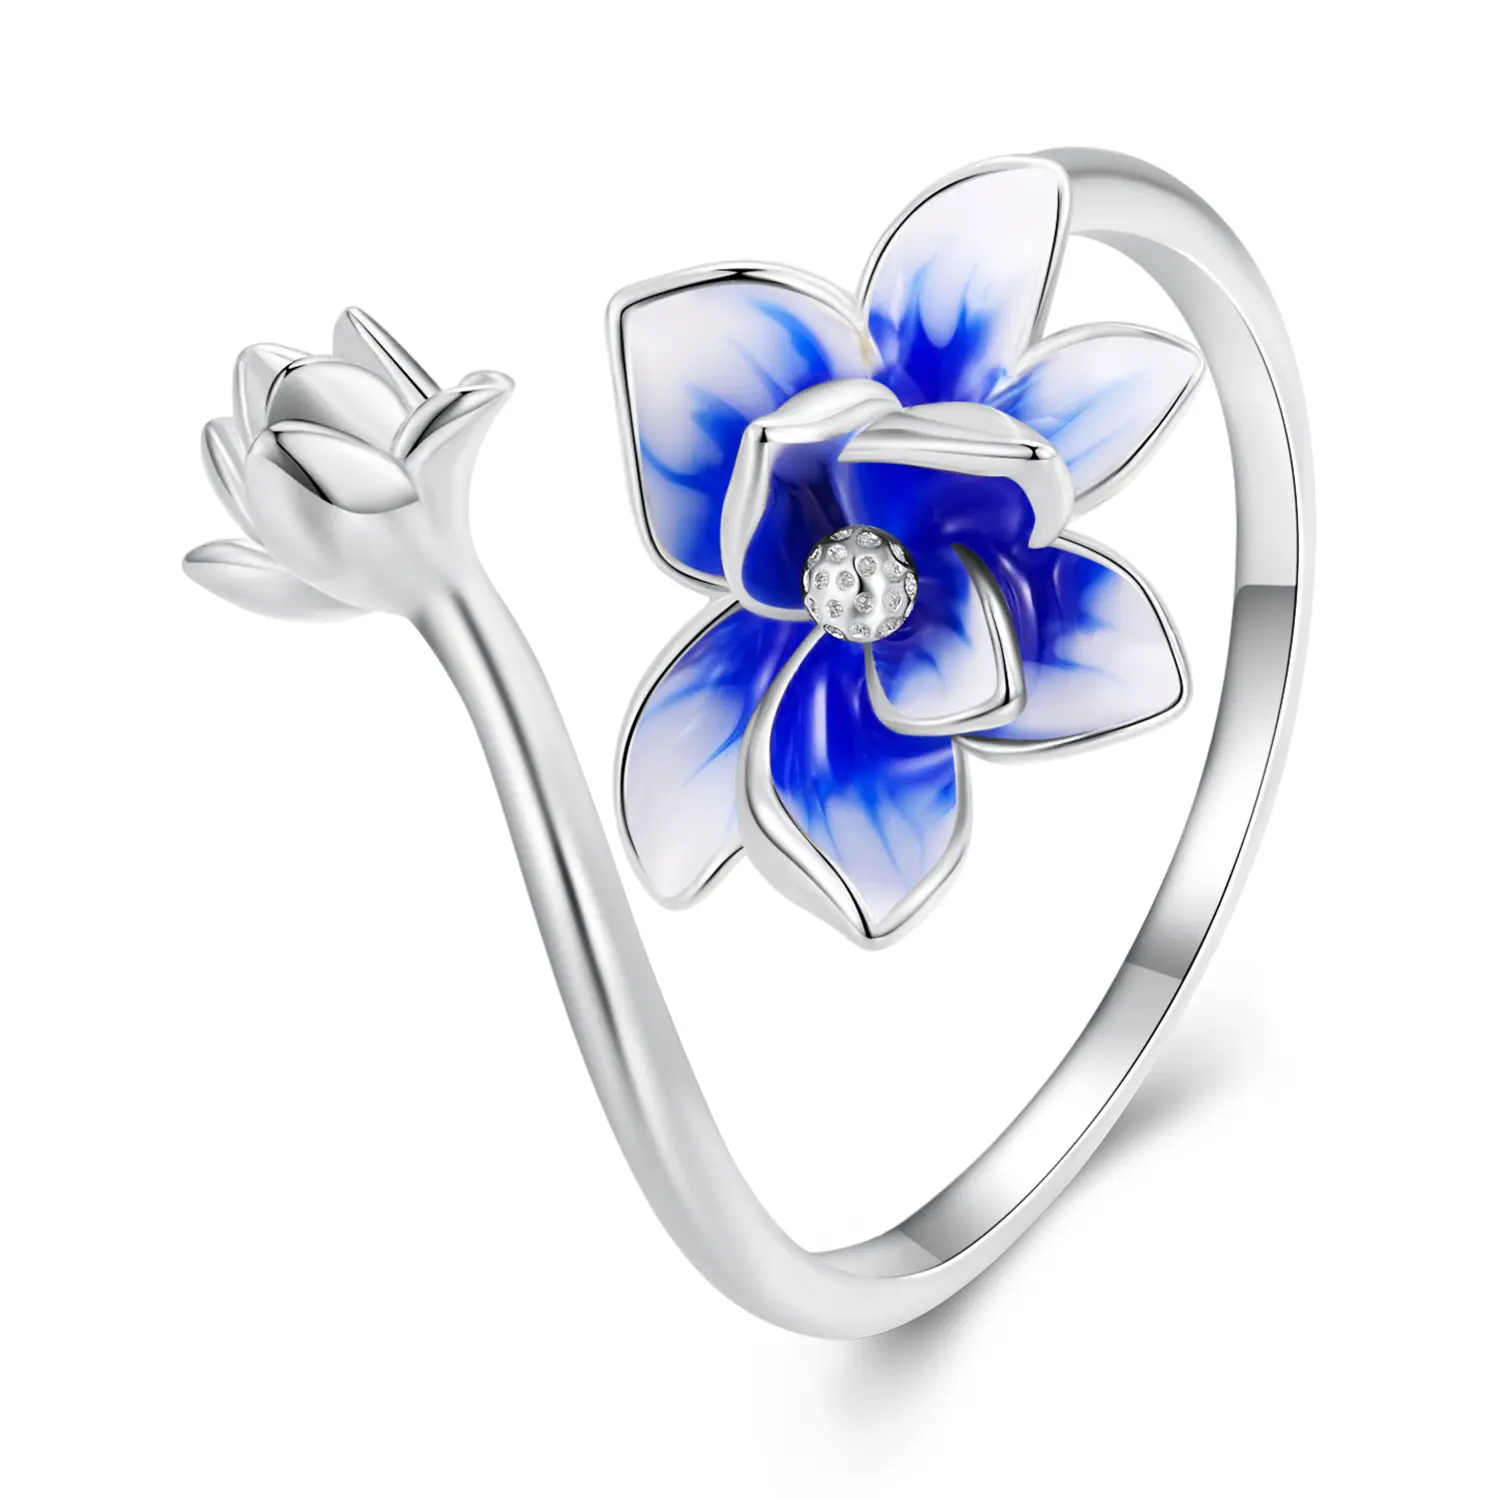 New arrival high quality flower design woman 925 sterling silver open ring